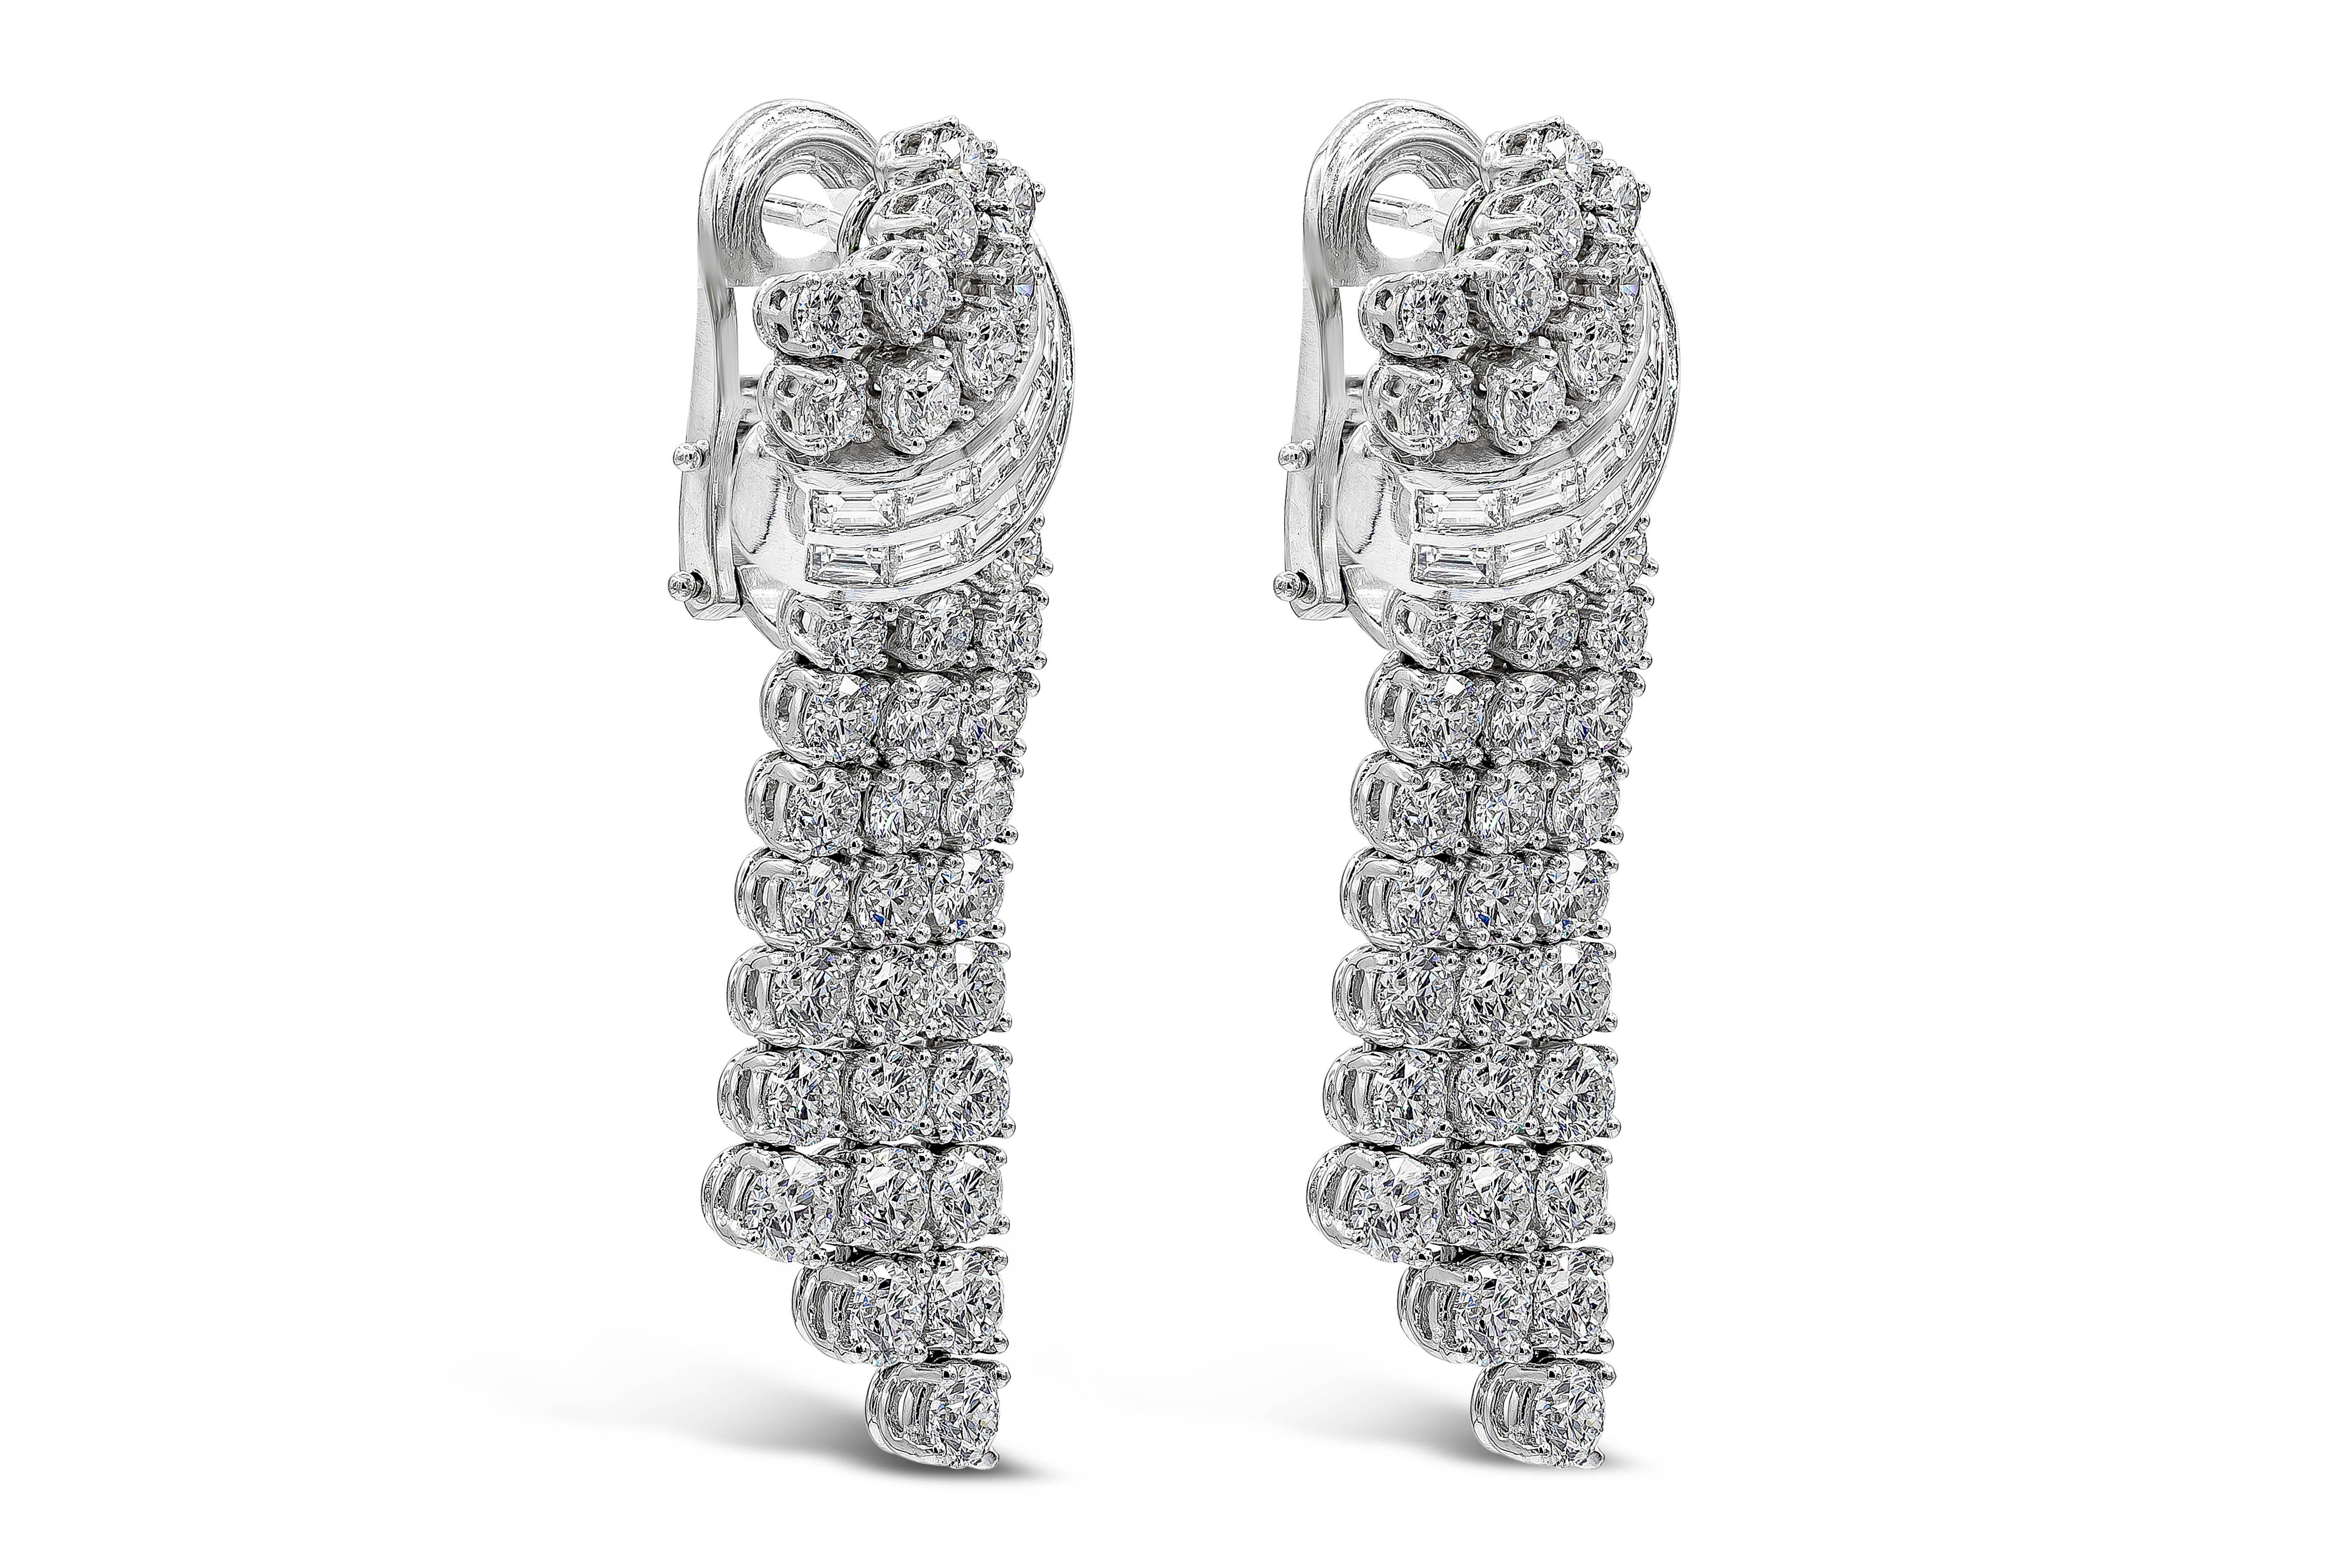 A fashionable pair of earrings showcasing a combination of baguette and round diamonds, set in an elegant drop design made in 18k white gold. Round diamonds weigh 10.04 carats total; baguette diamonds weigh 1.70 carats total. Diamonds are